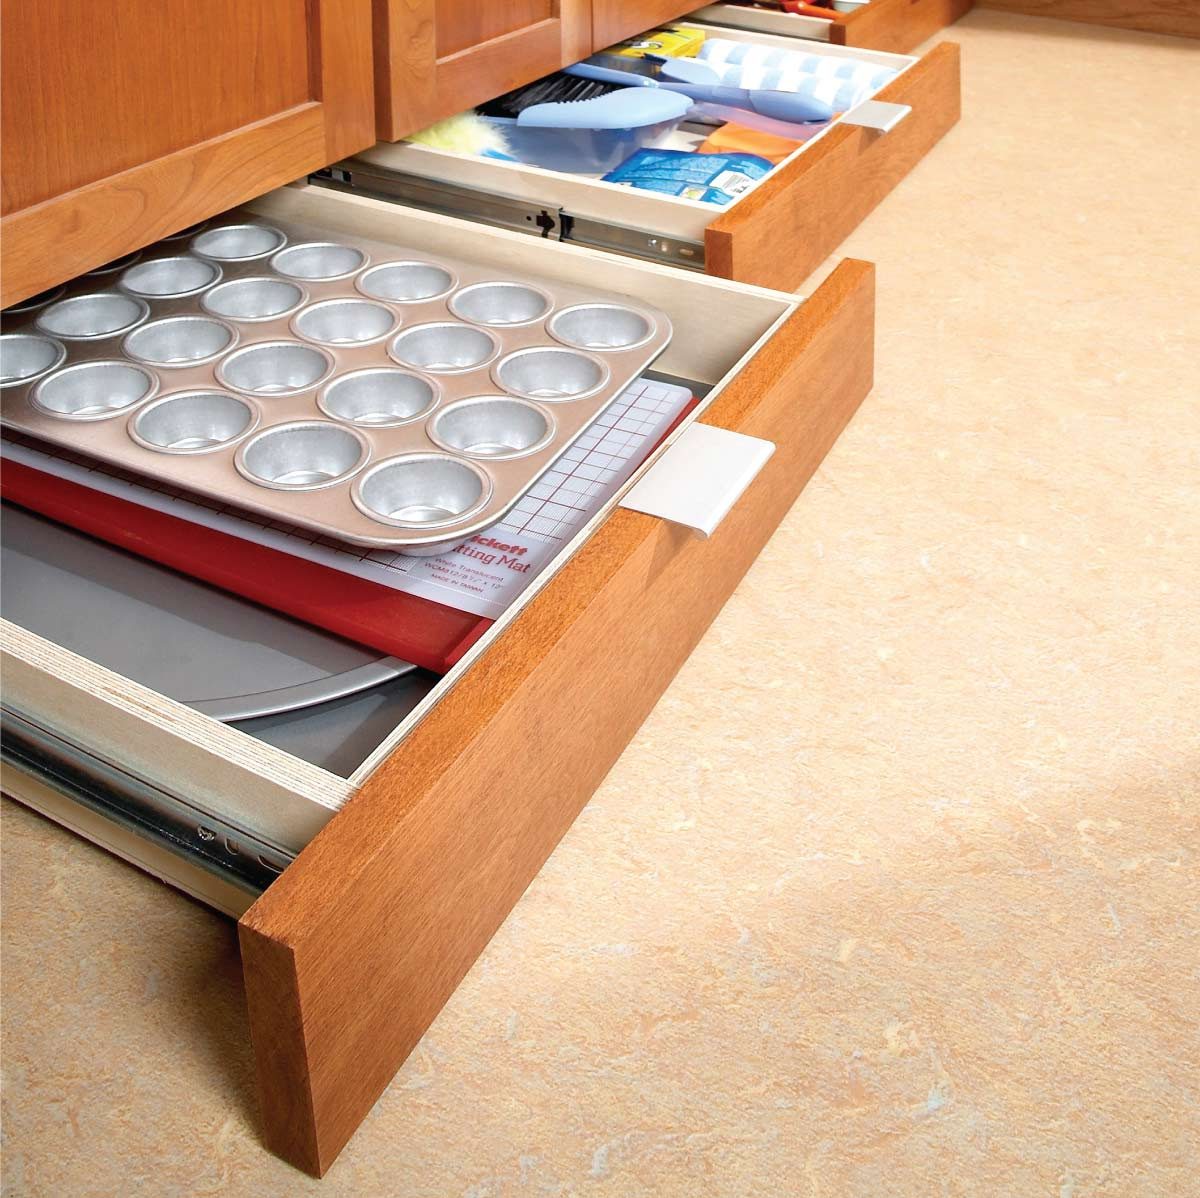 How to Build Drawers & Increase Kitchen Storage (DIY